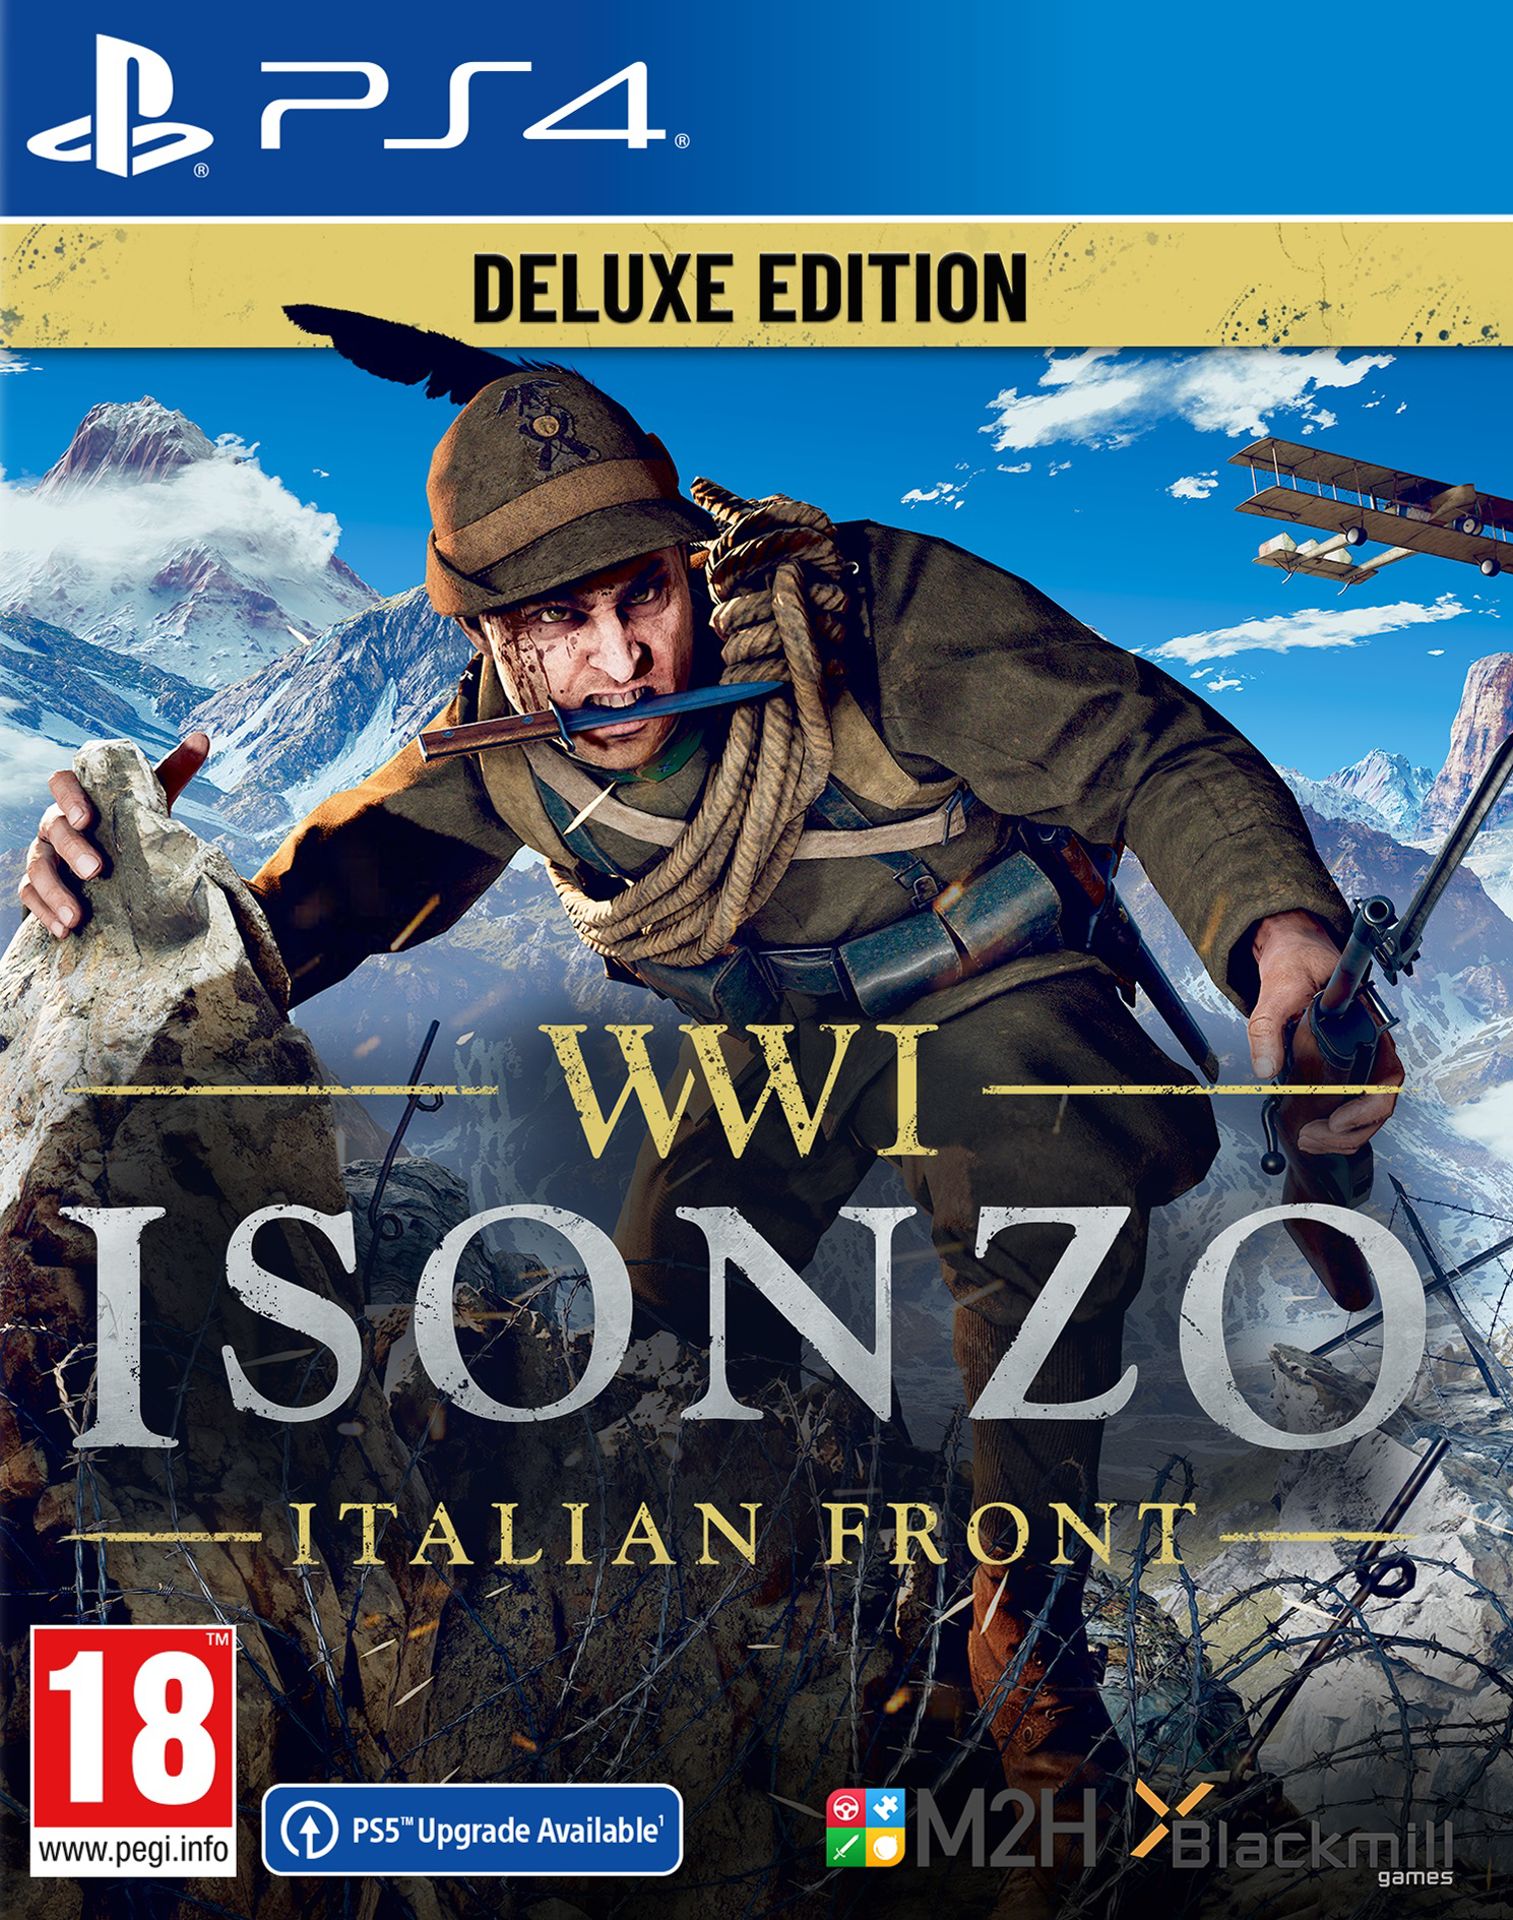 WWI Isonzo: Italian Front - Deluxe Edition